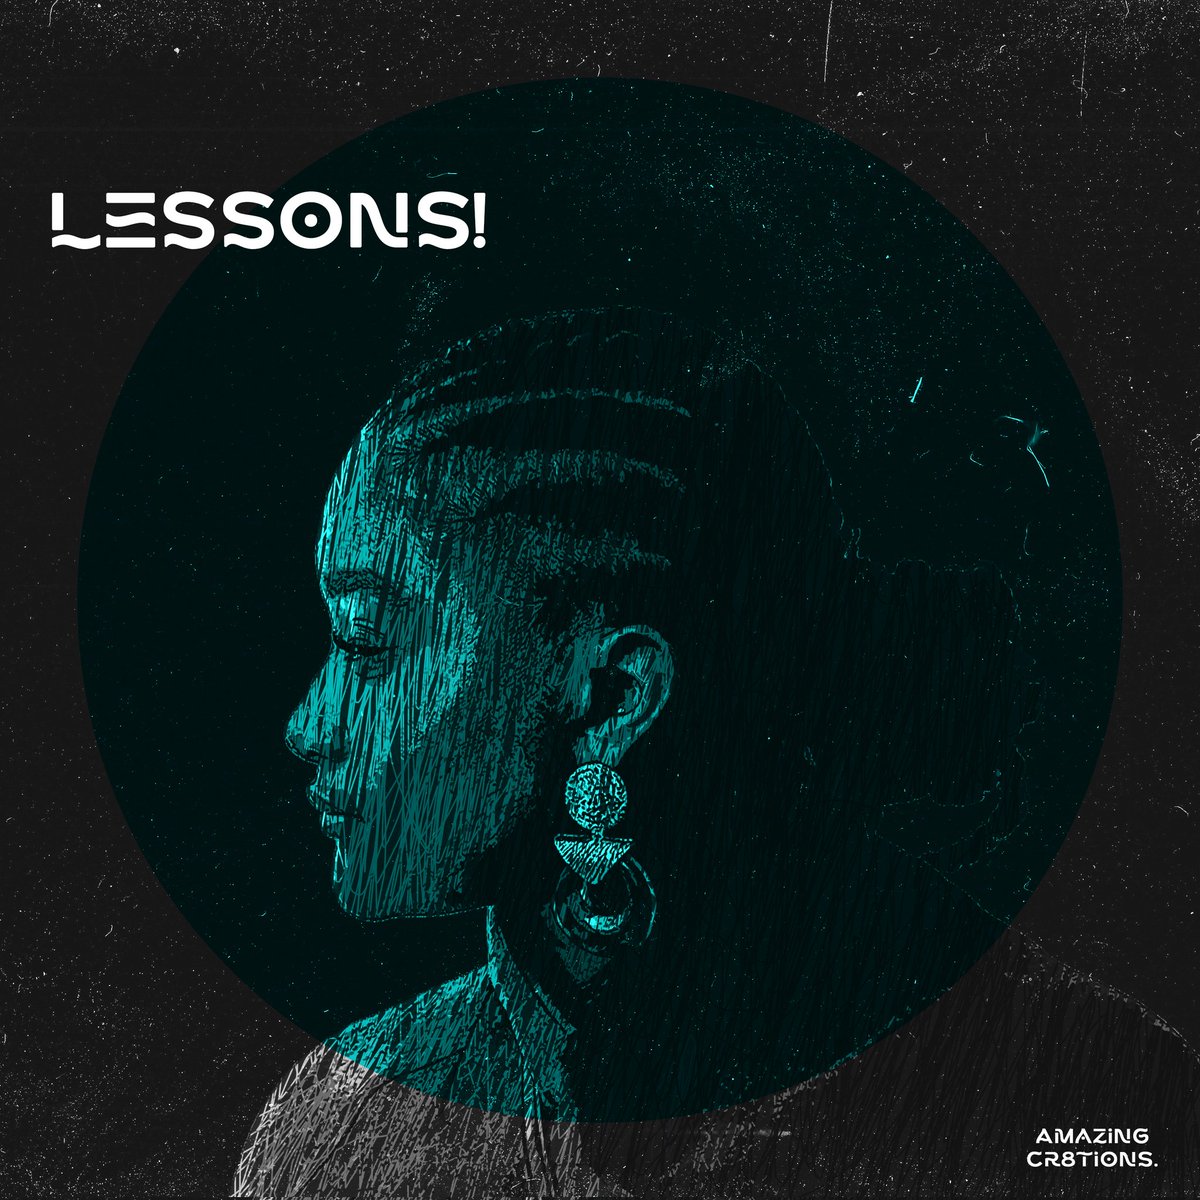 Day 5 of 30 Days Design Challeng.

What has life taught you? What are the LESSONS you have gotten from the school of life? 

We never stop learning in this school, it continues till the day we die.
#lessons
#Learningneverends
#Photoshop